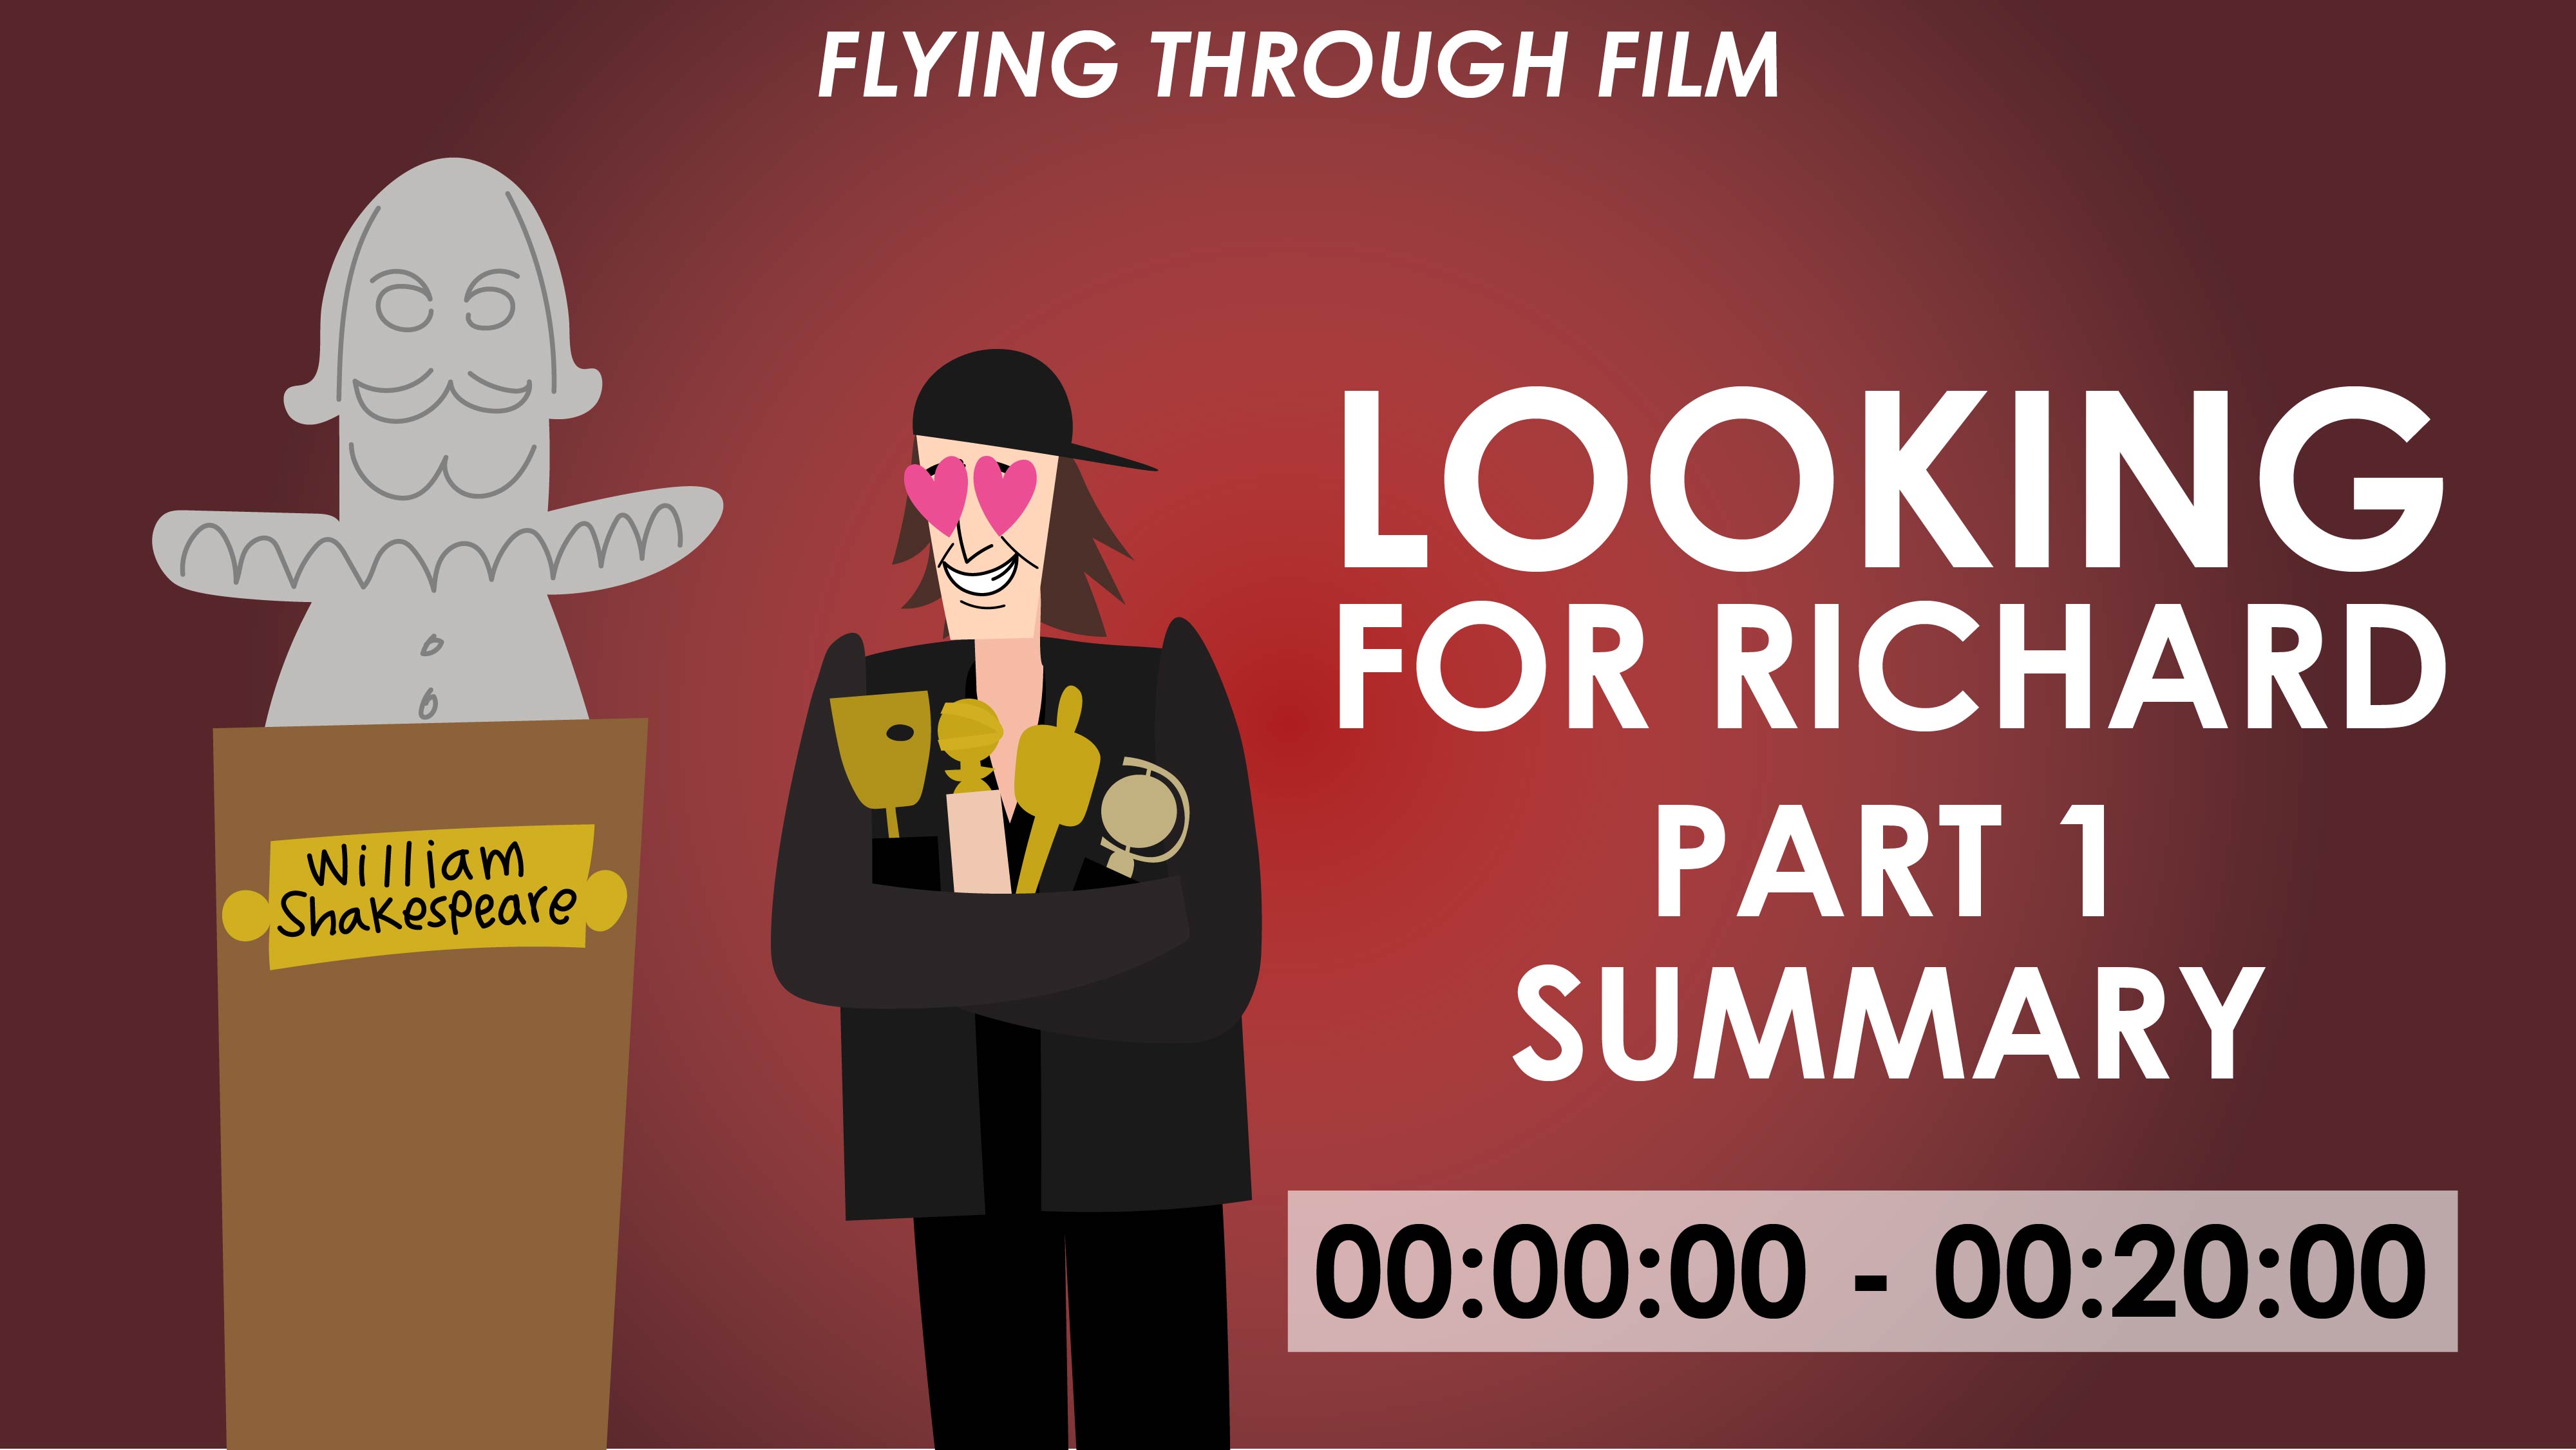 Looking For Richard - Part 1 Summary - Flying Through Film Series